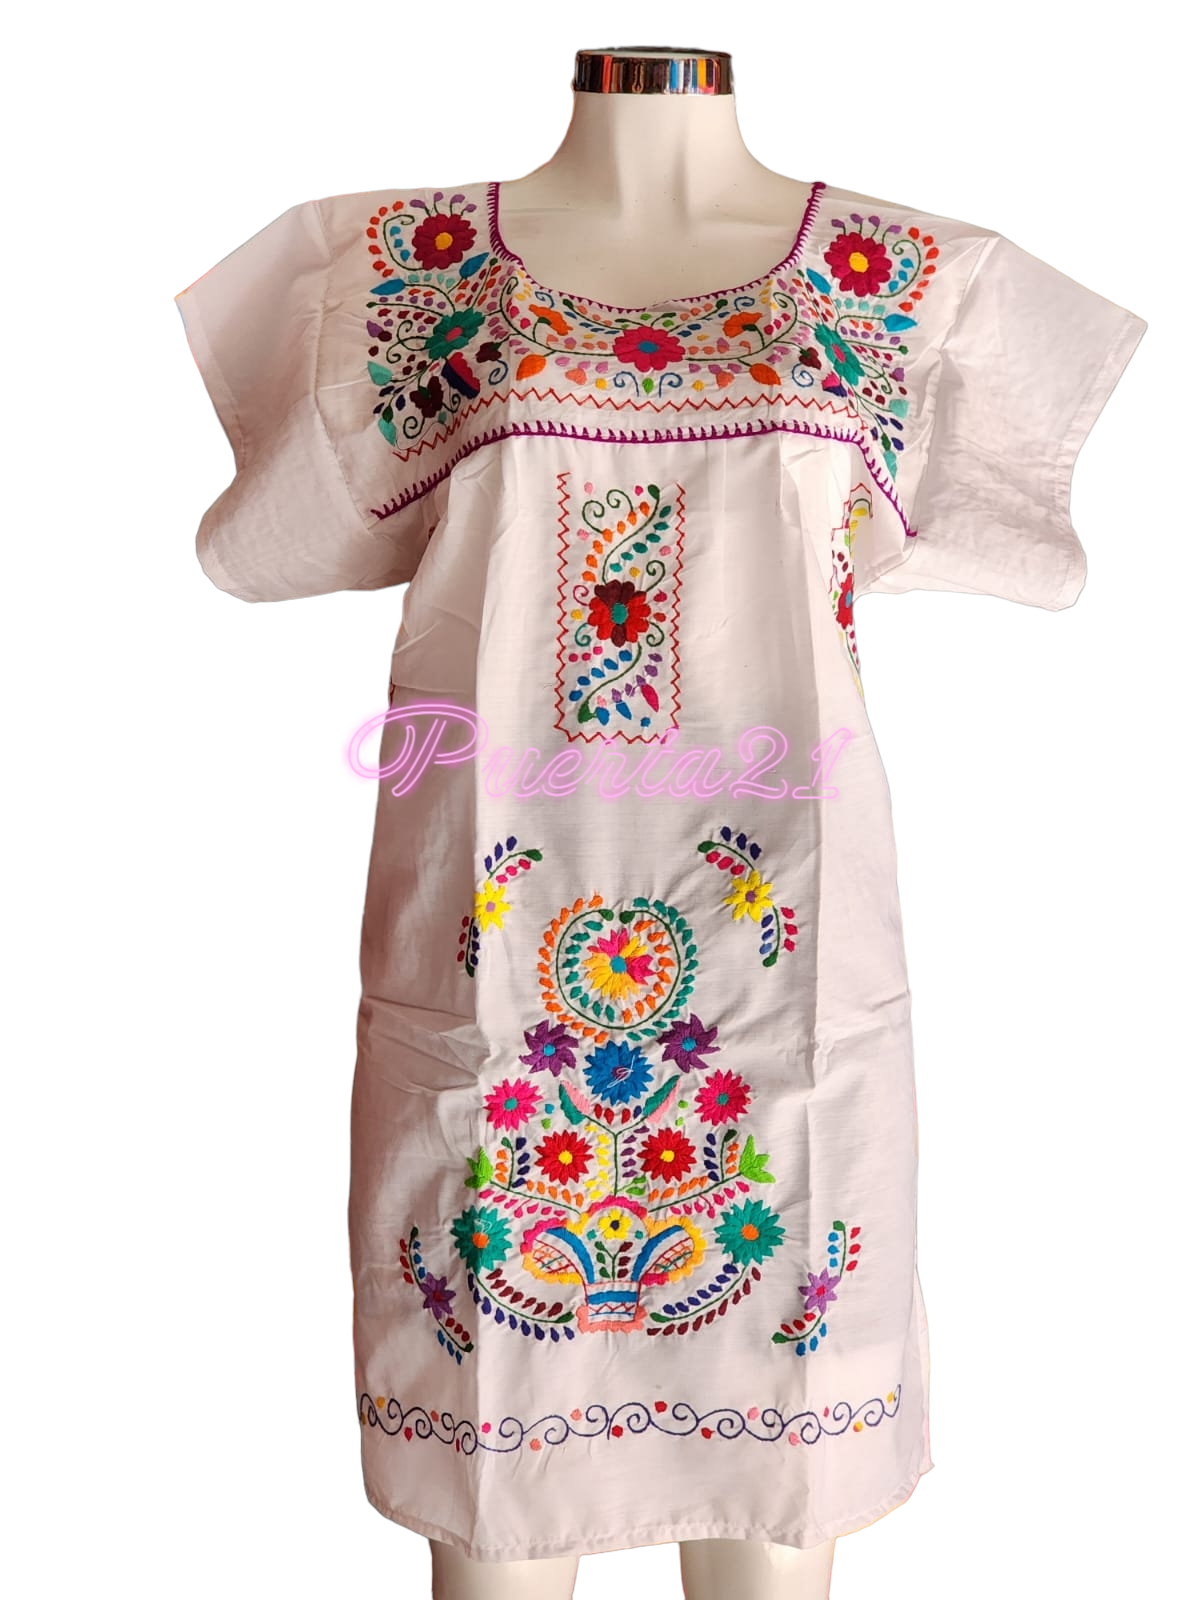 Girl's Mexican Dress Puebla White Hand Embroidered Multicolored Floral  Embroidery 